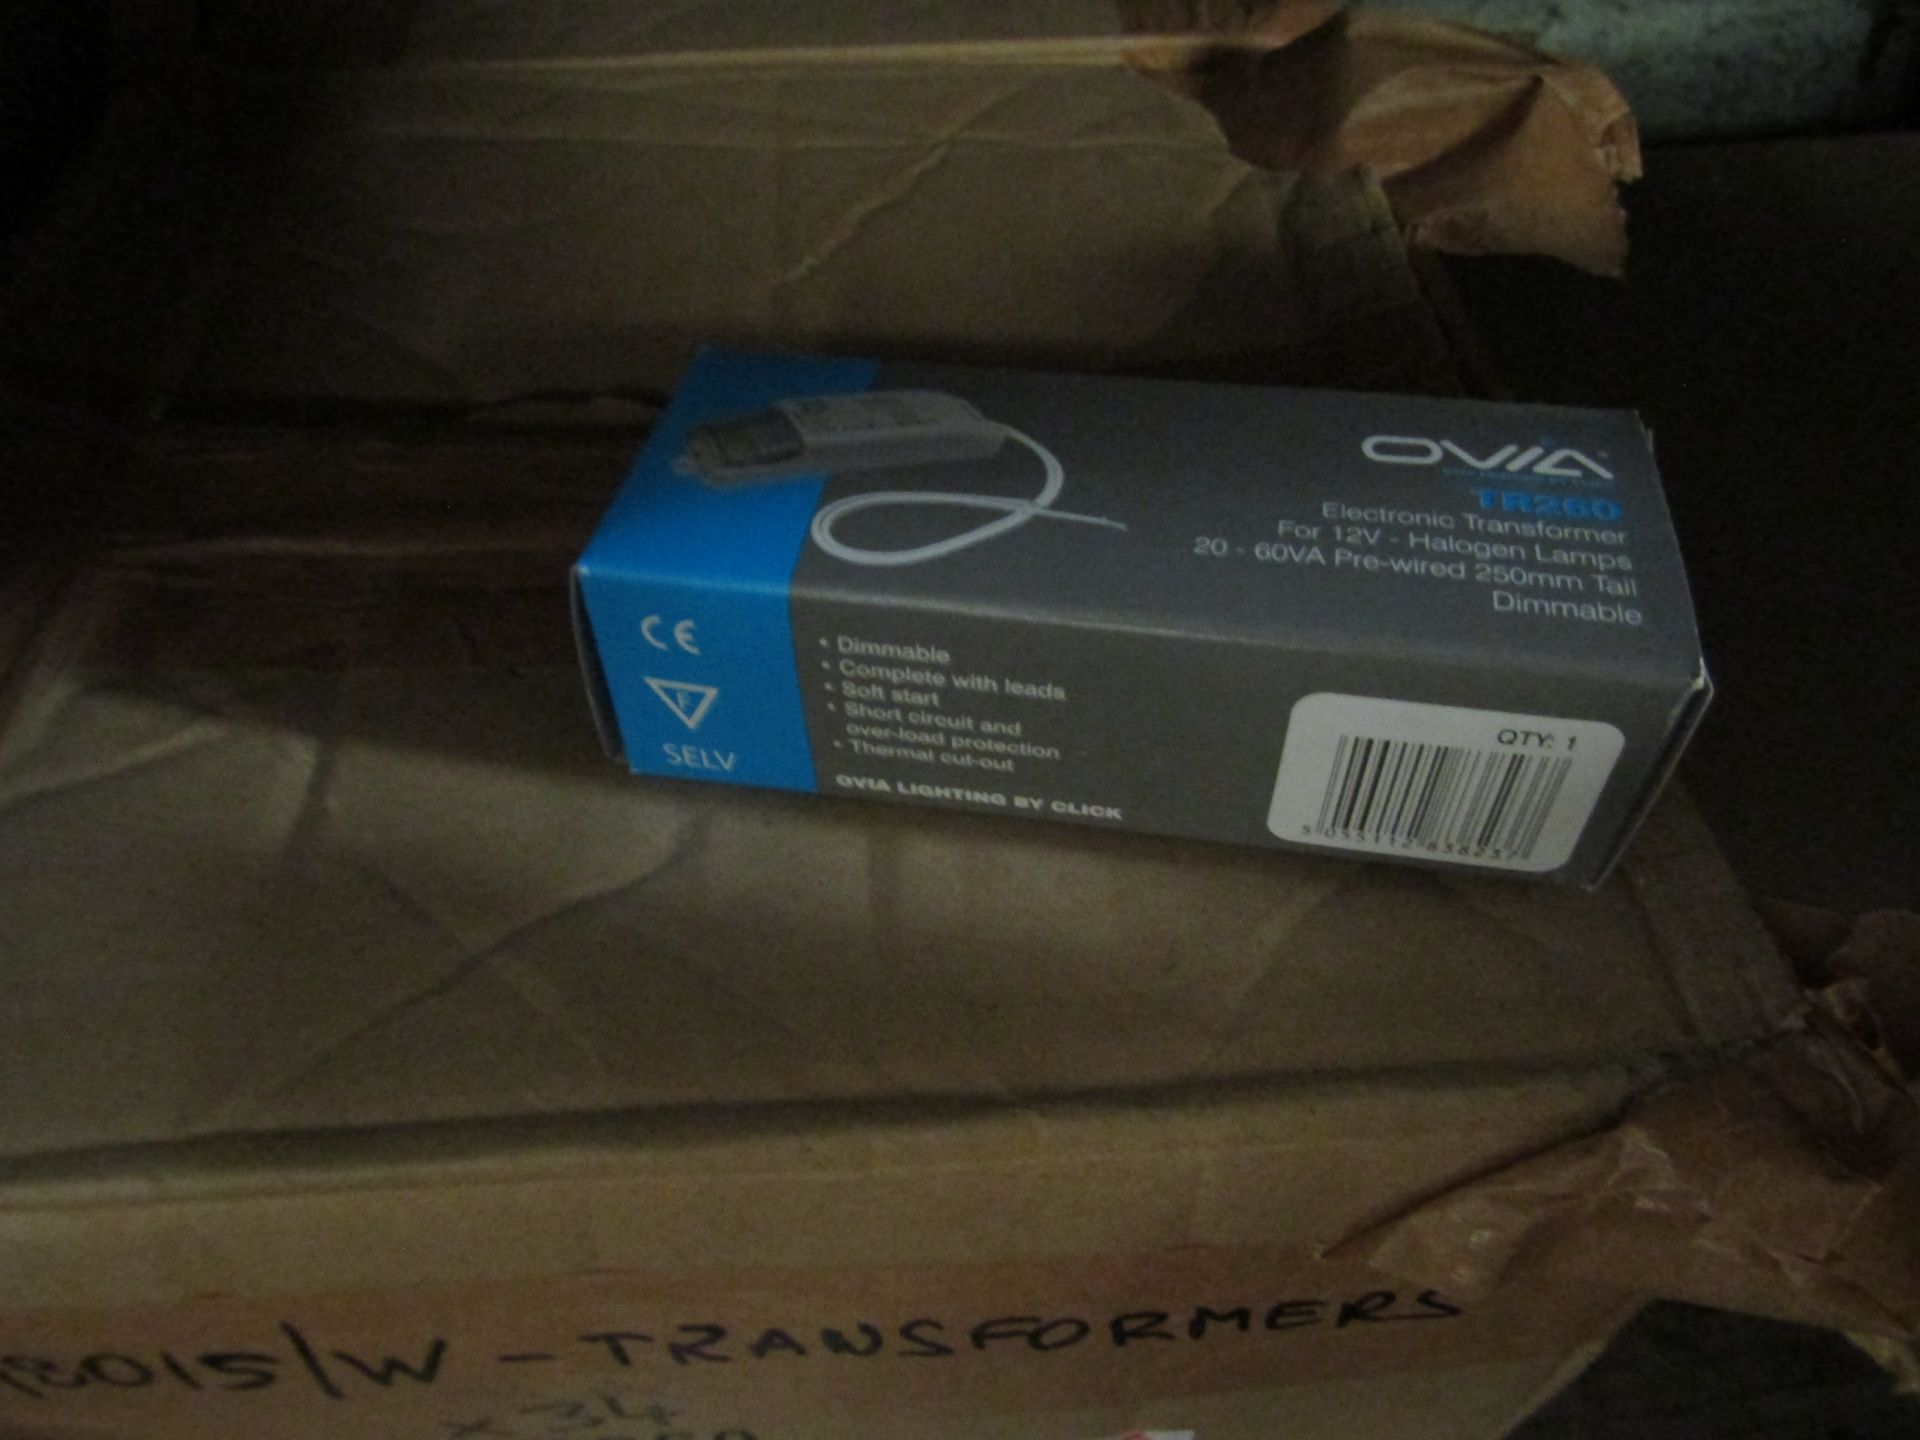 6 x Ovia? TR260 Electronic Transfprmer Dimmable? White new & boxed